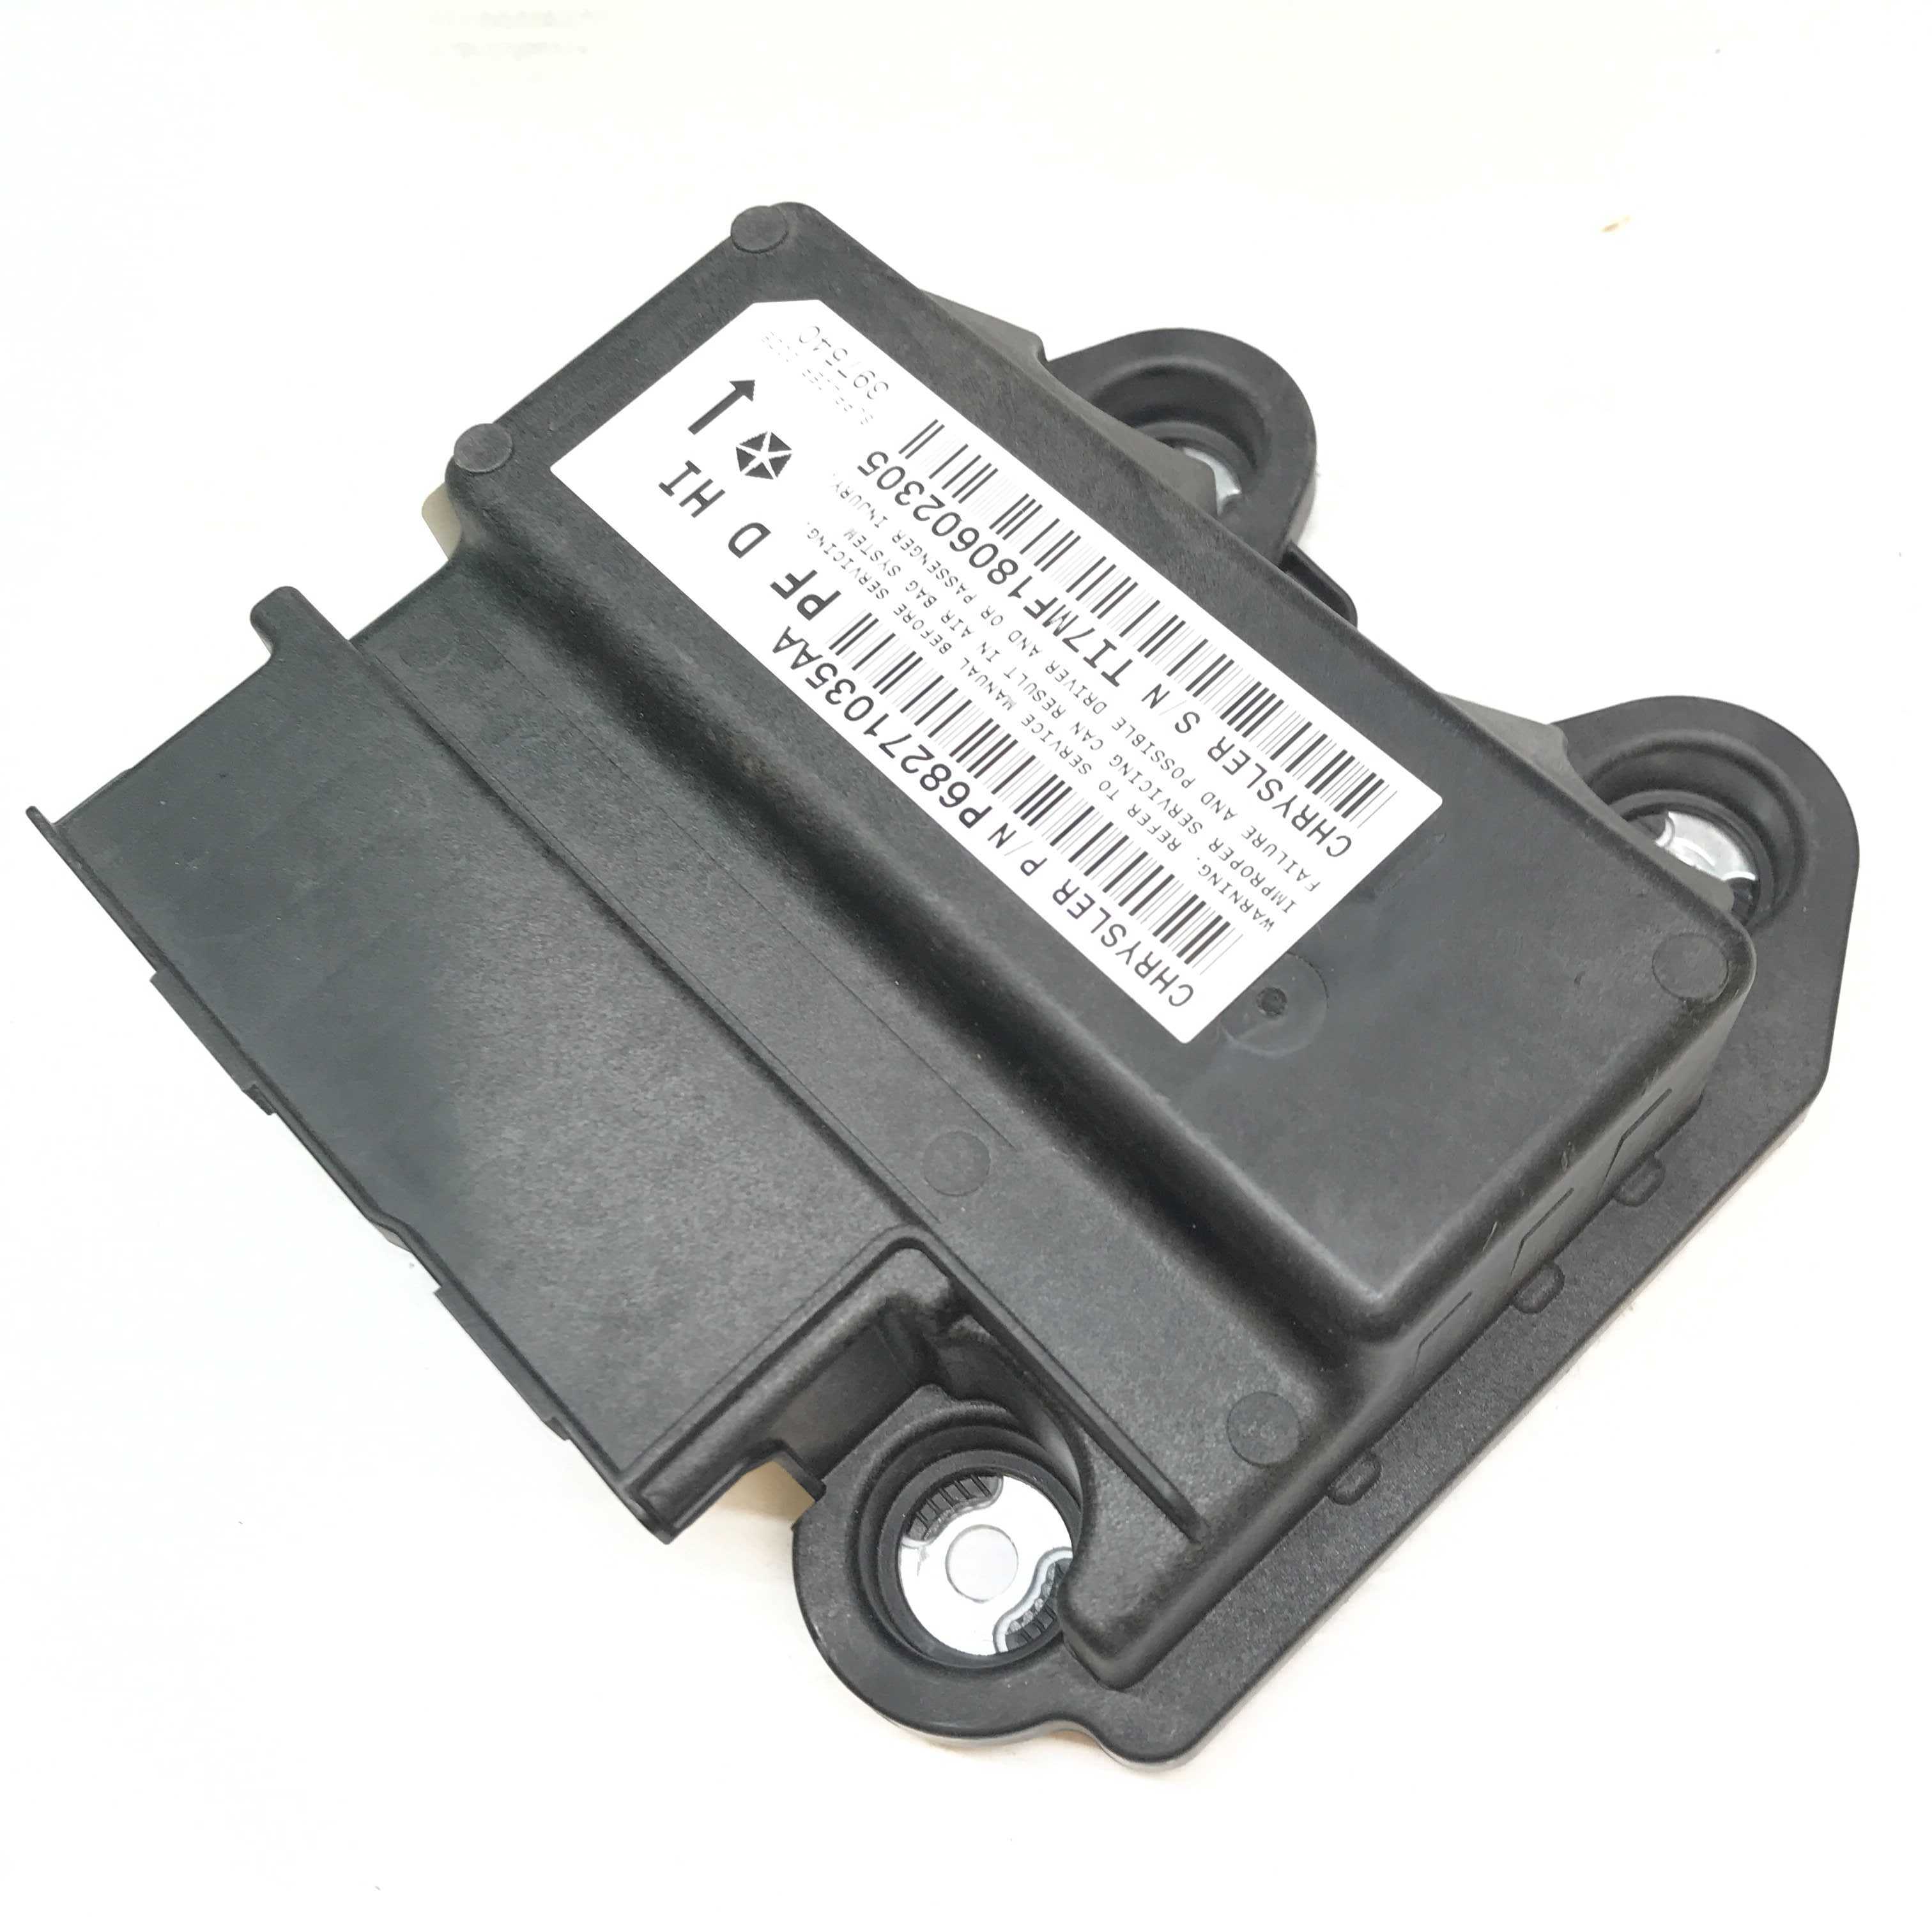 JEEP CHEROKEE SRS ORC ORM Occupant Control Module - Airbag Computer Control Module PART #P68469499AA